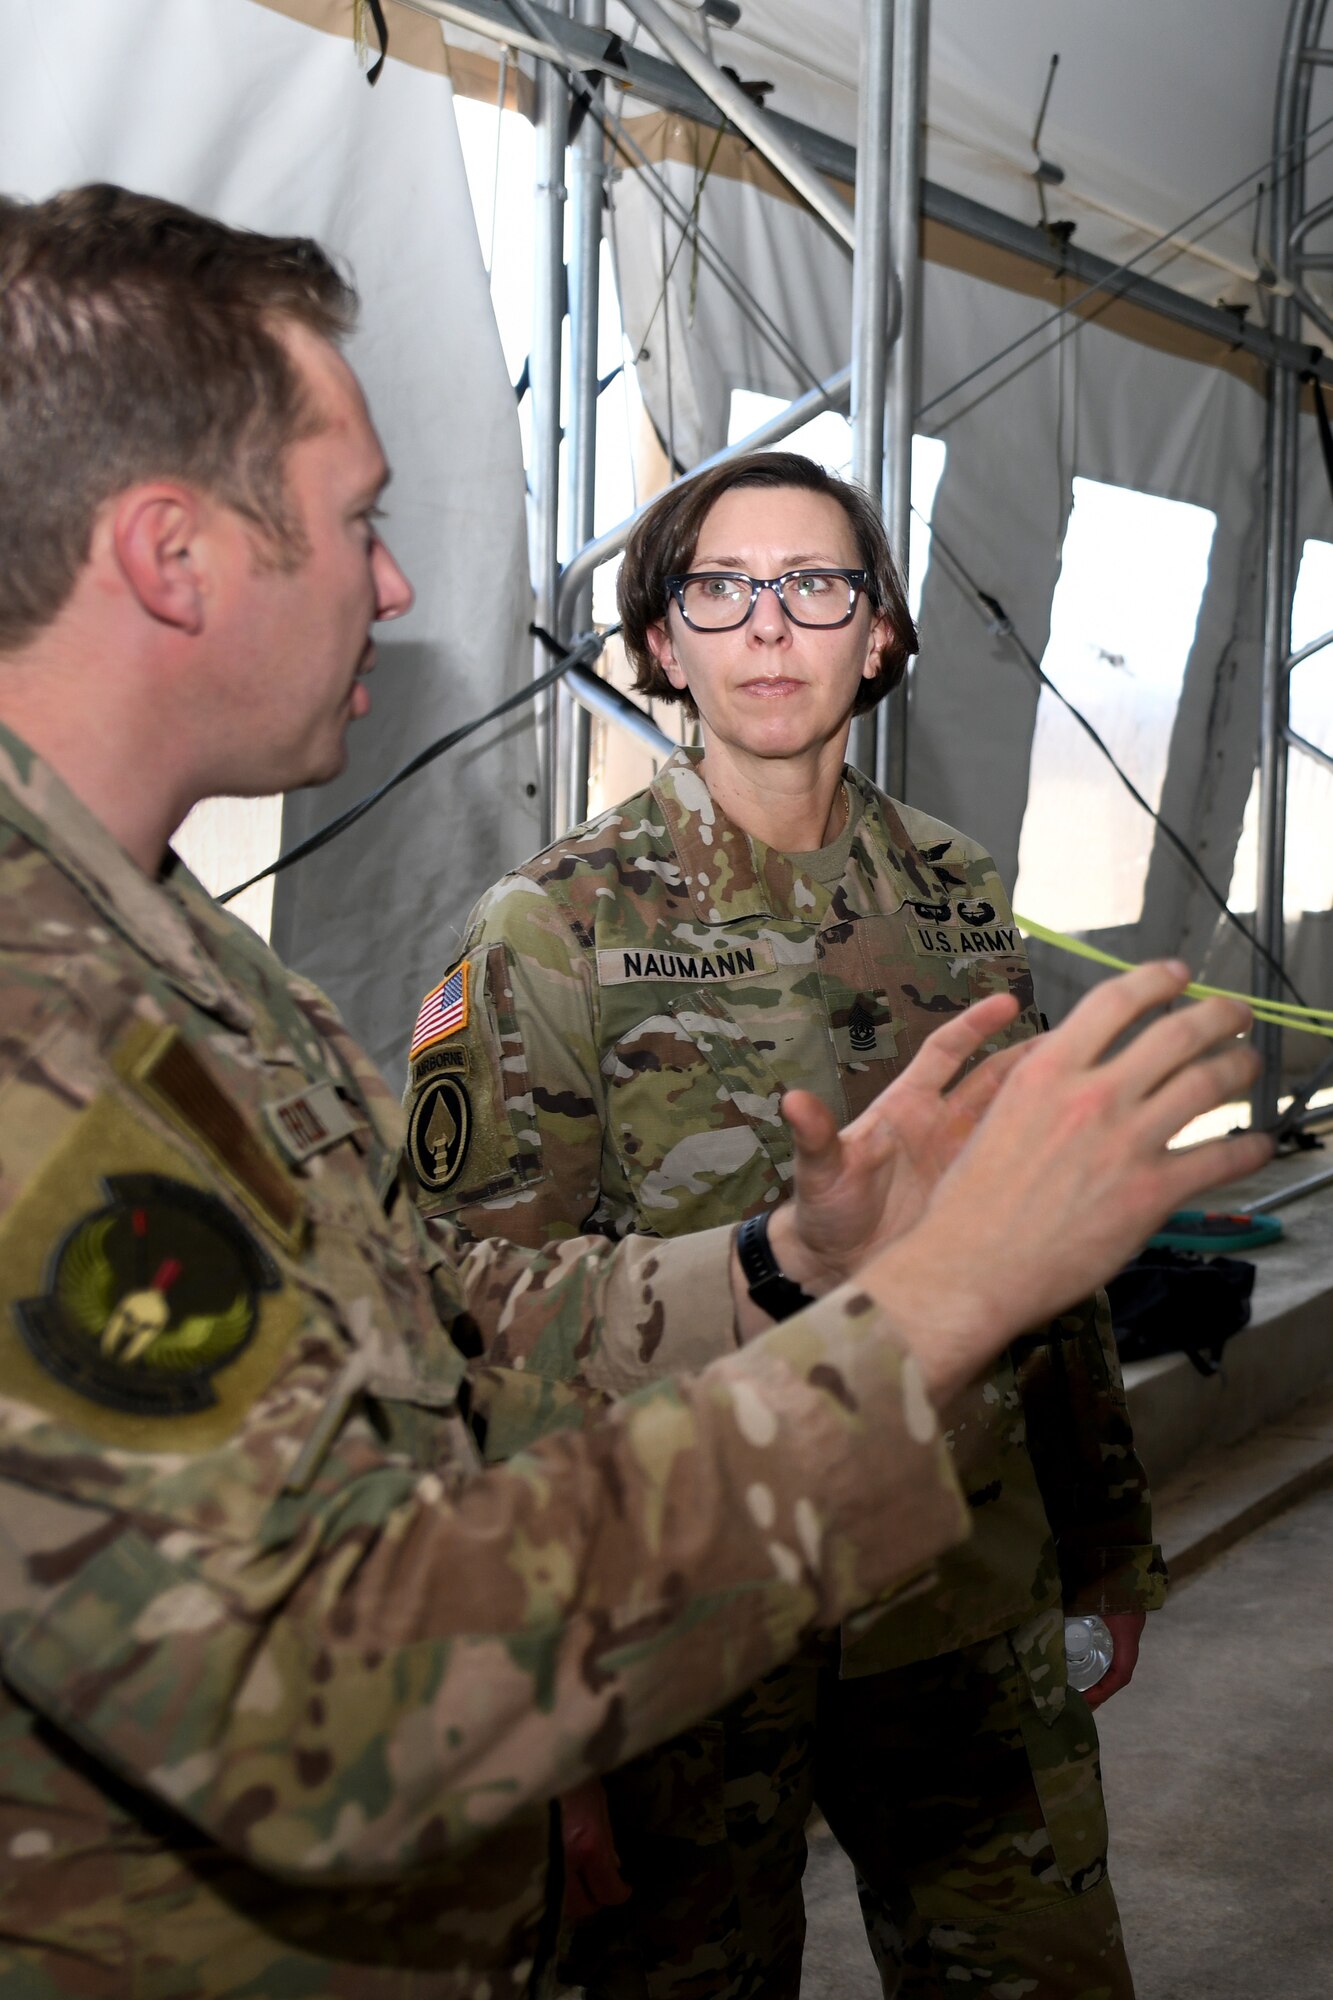 U.S. Army Command Sgt. Maj. JoAnn Naumann, command senior enlisted leader, U.S. Special Operations Command, Korea (right) speaks with U.S. Air Force Master Sgt. Michael Perolio, Special Warfare Training Flight Superintendent, (left) about the Assessment and Selection process for Air Force Special Warefare candidates at Joint Base San Anotnio, TX, Mar. 16, 2022. Naumann visited the area to mentor the NCOs and observe the SWTW Assessment and Selection process. (U.S. Air Force photo by Brian Boisvert)